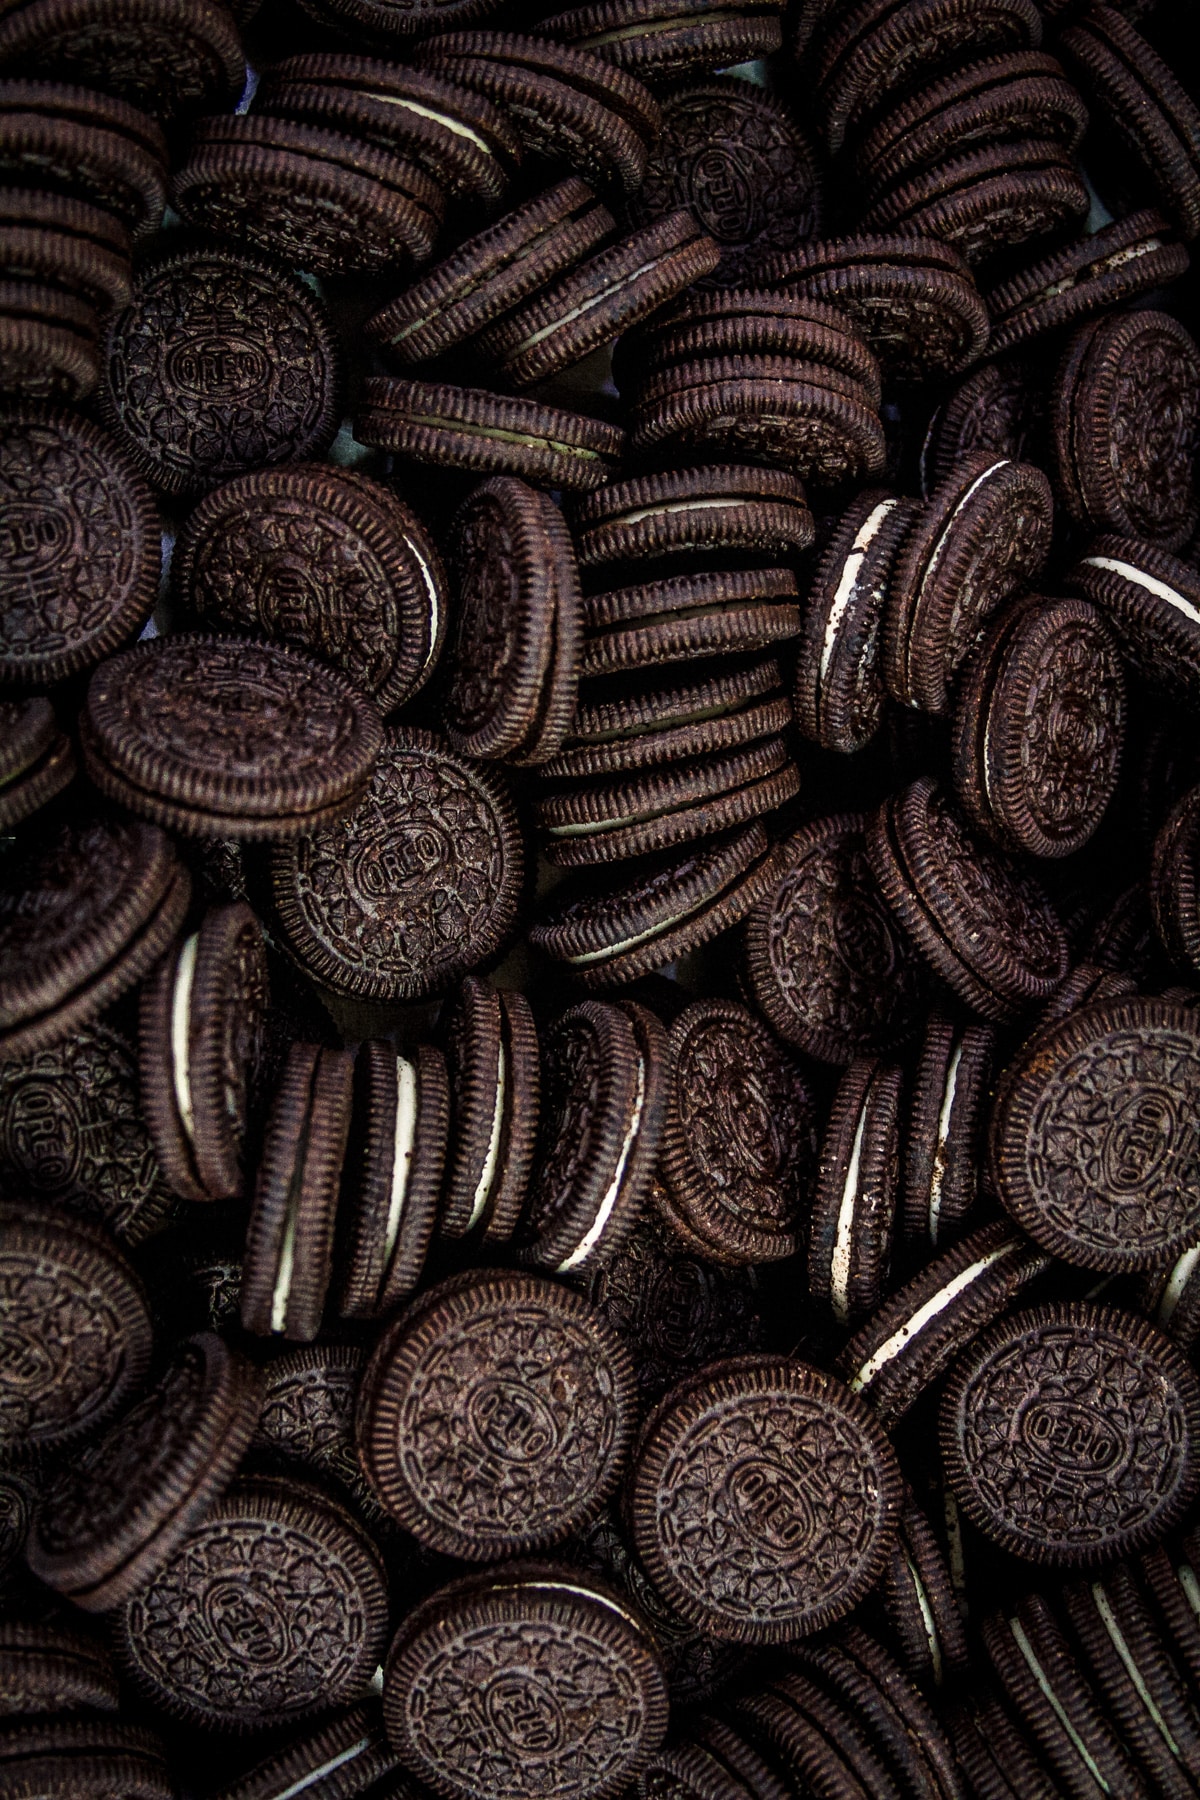 Large pile of dozens of Oreos cookies covering the surface.